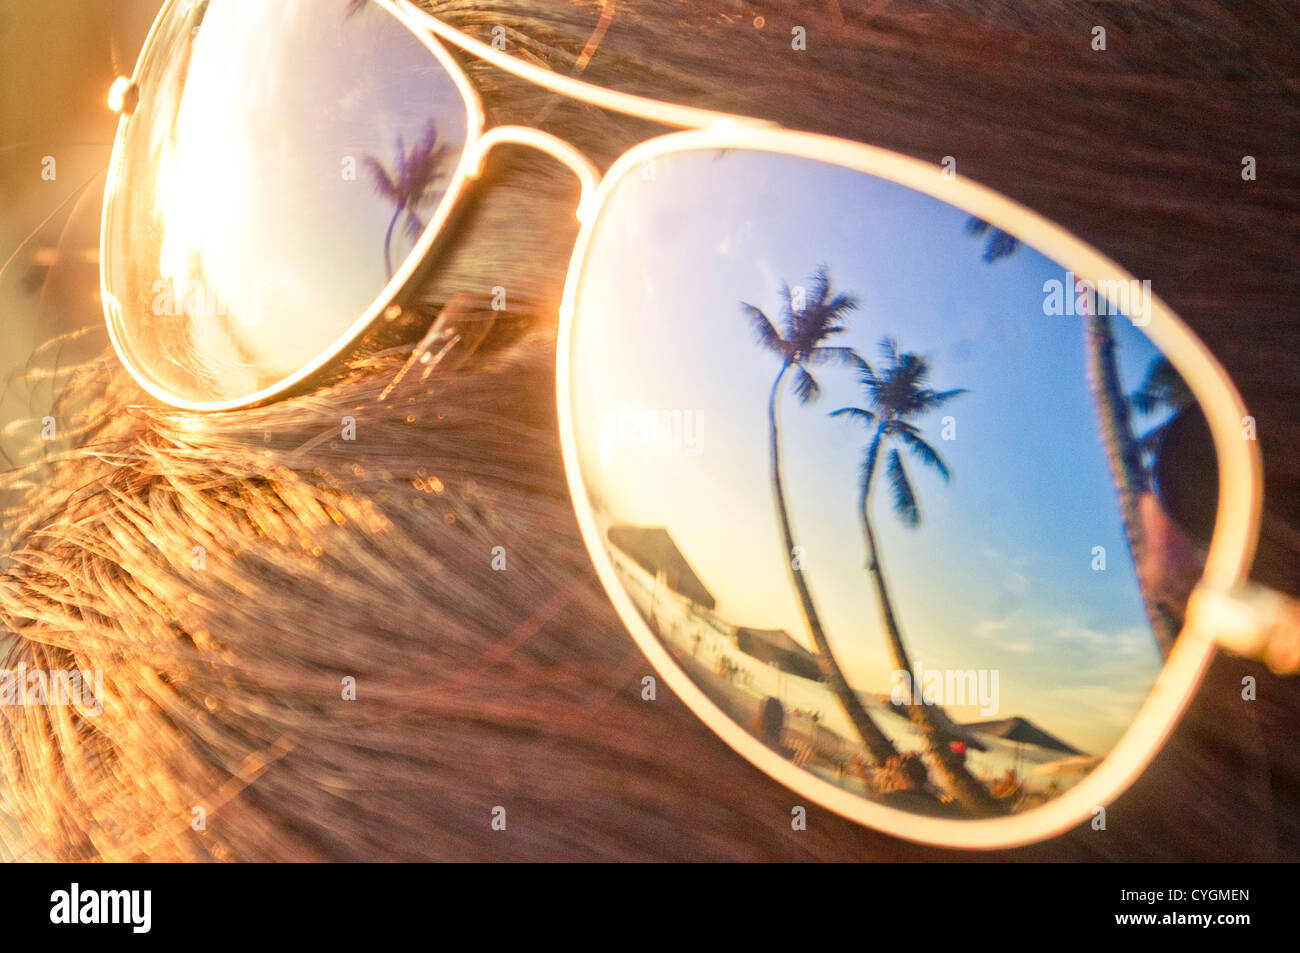 concepts of tropical vacations or holidays, reflection of palm tree on sunglasses. Stock Photo